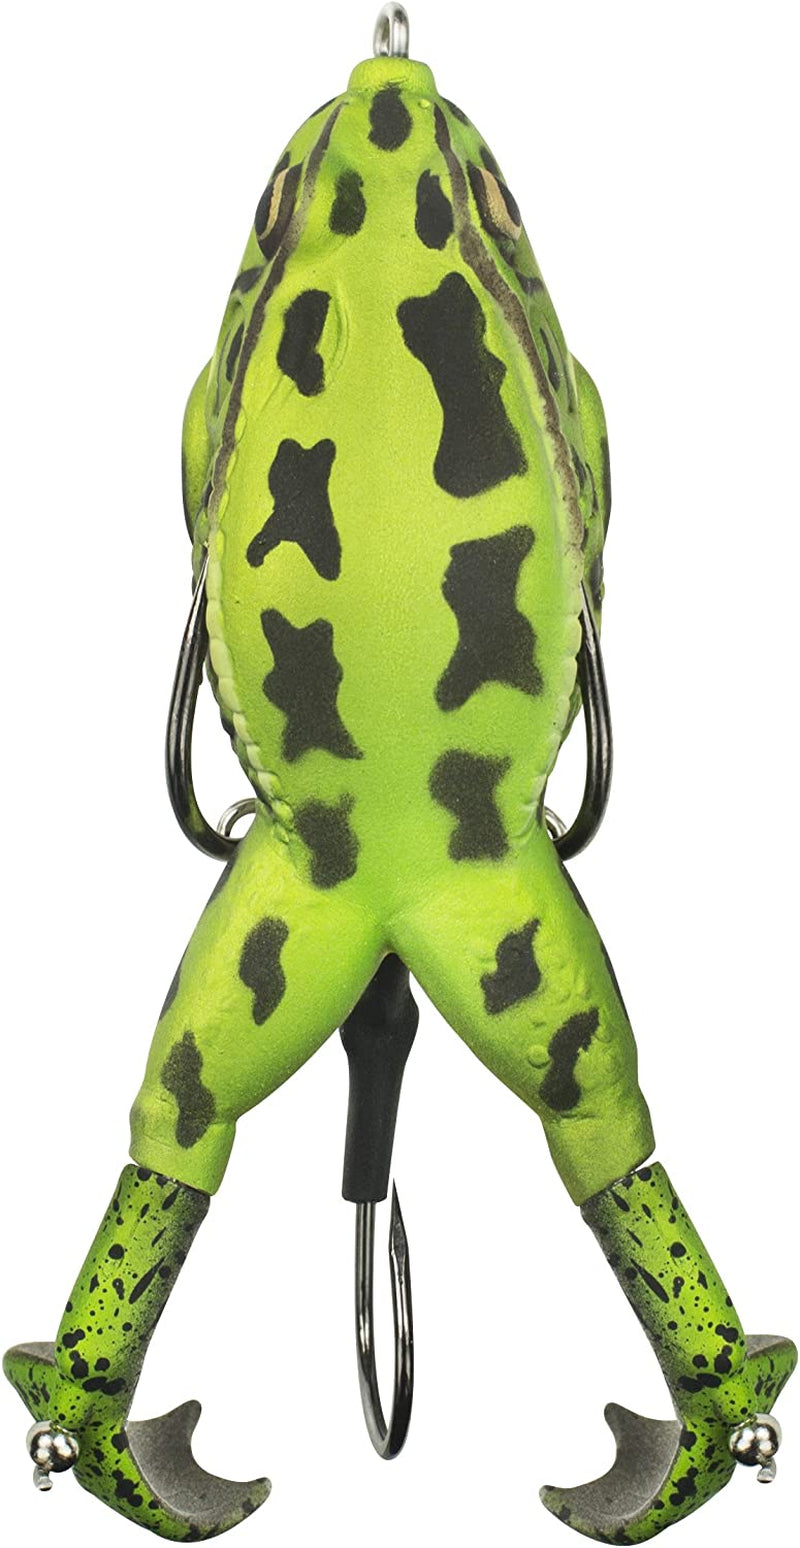 Lunkerhunt Prop Frog – Freshwater Fishing Lure with Realistic Design, Weighs ½ Oz, 3.5” Length Sporting Goods > Outdoor Recreation > Fishing > Fishing Tackle > Fishing Baits & Lures Lunkerhunt Green Tea  